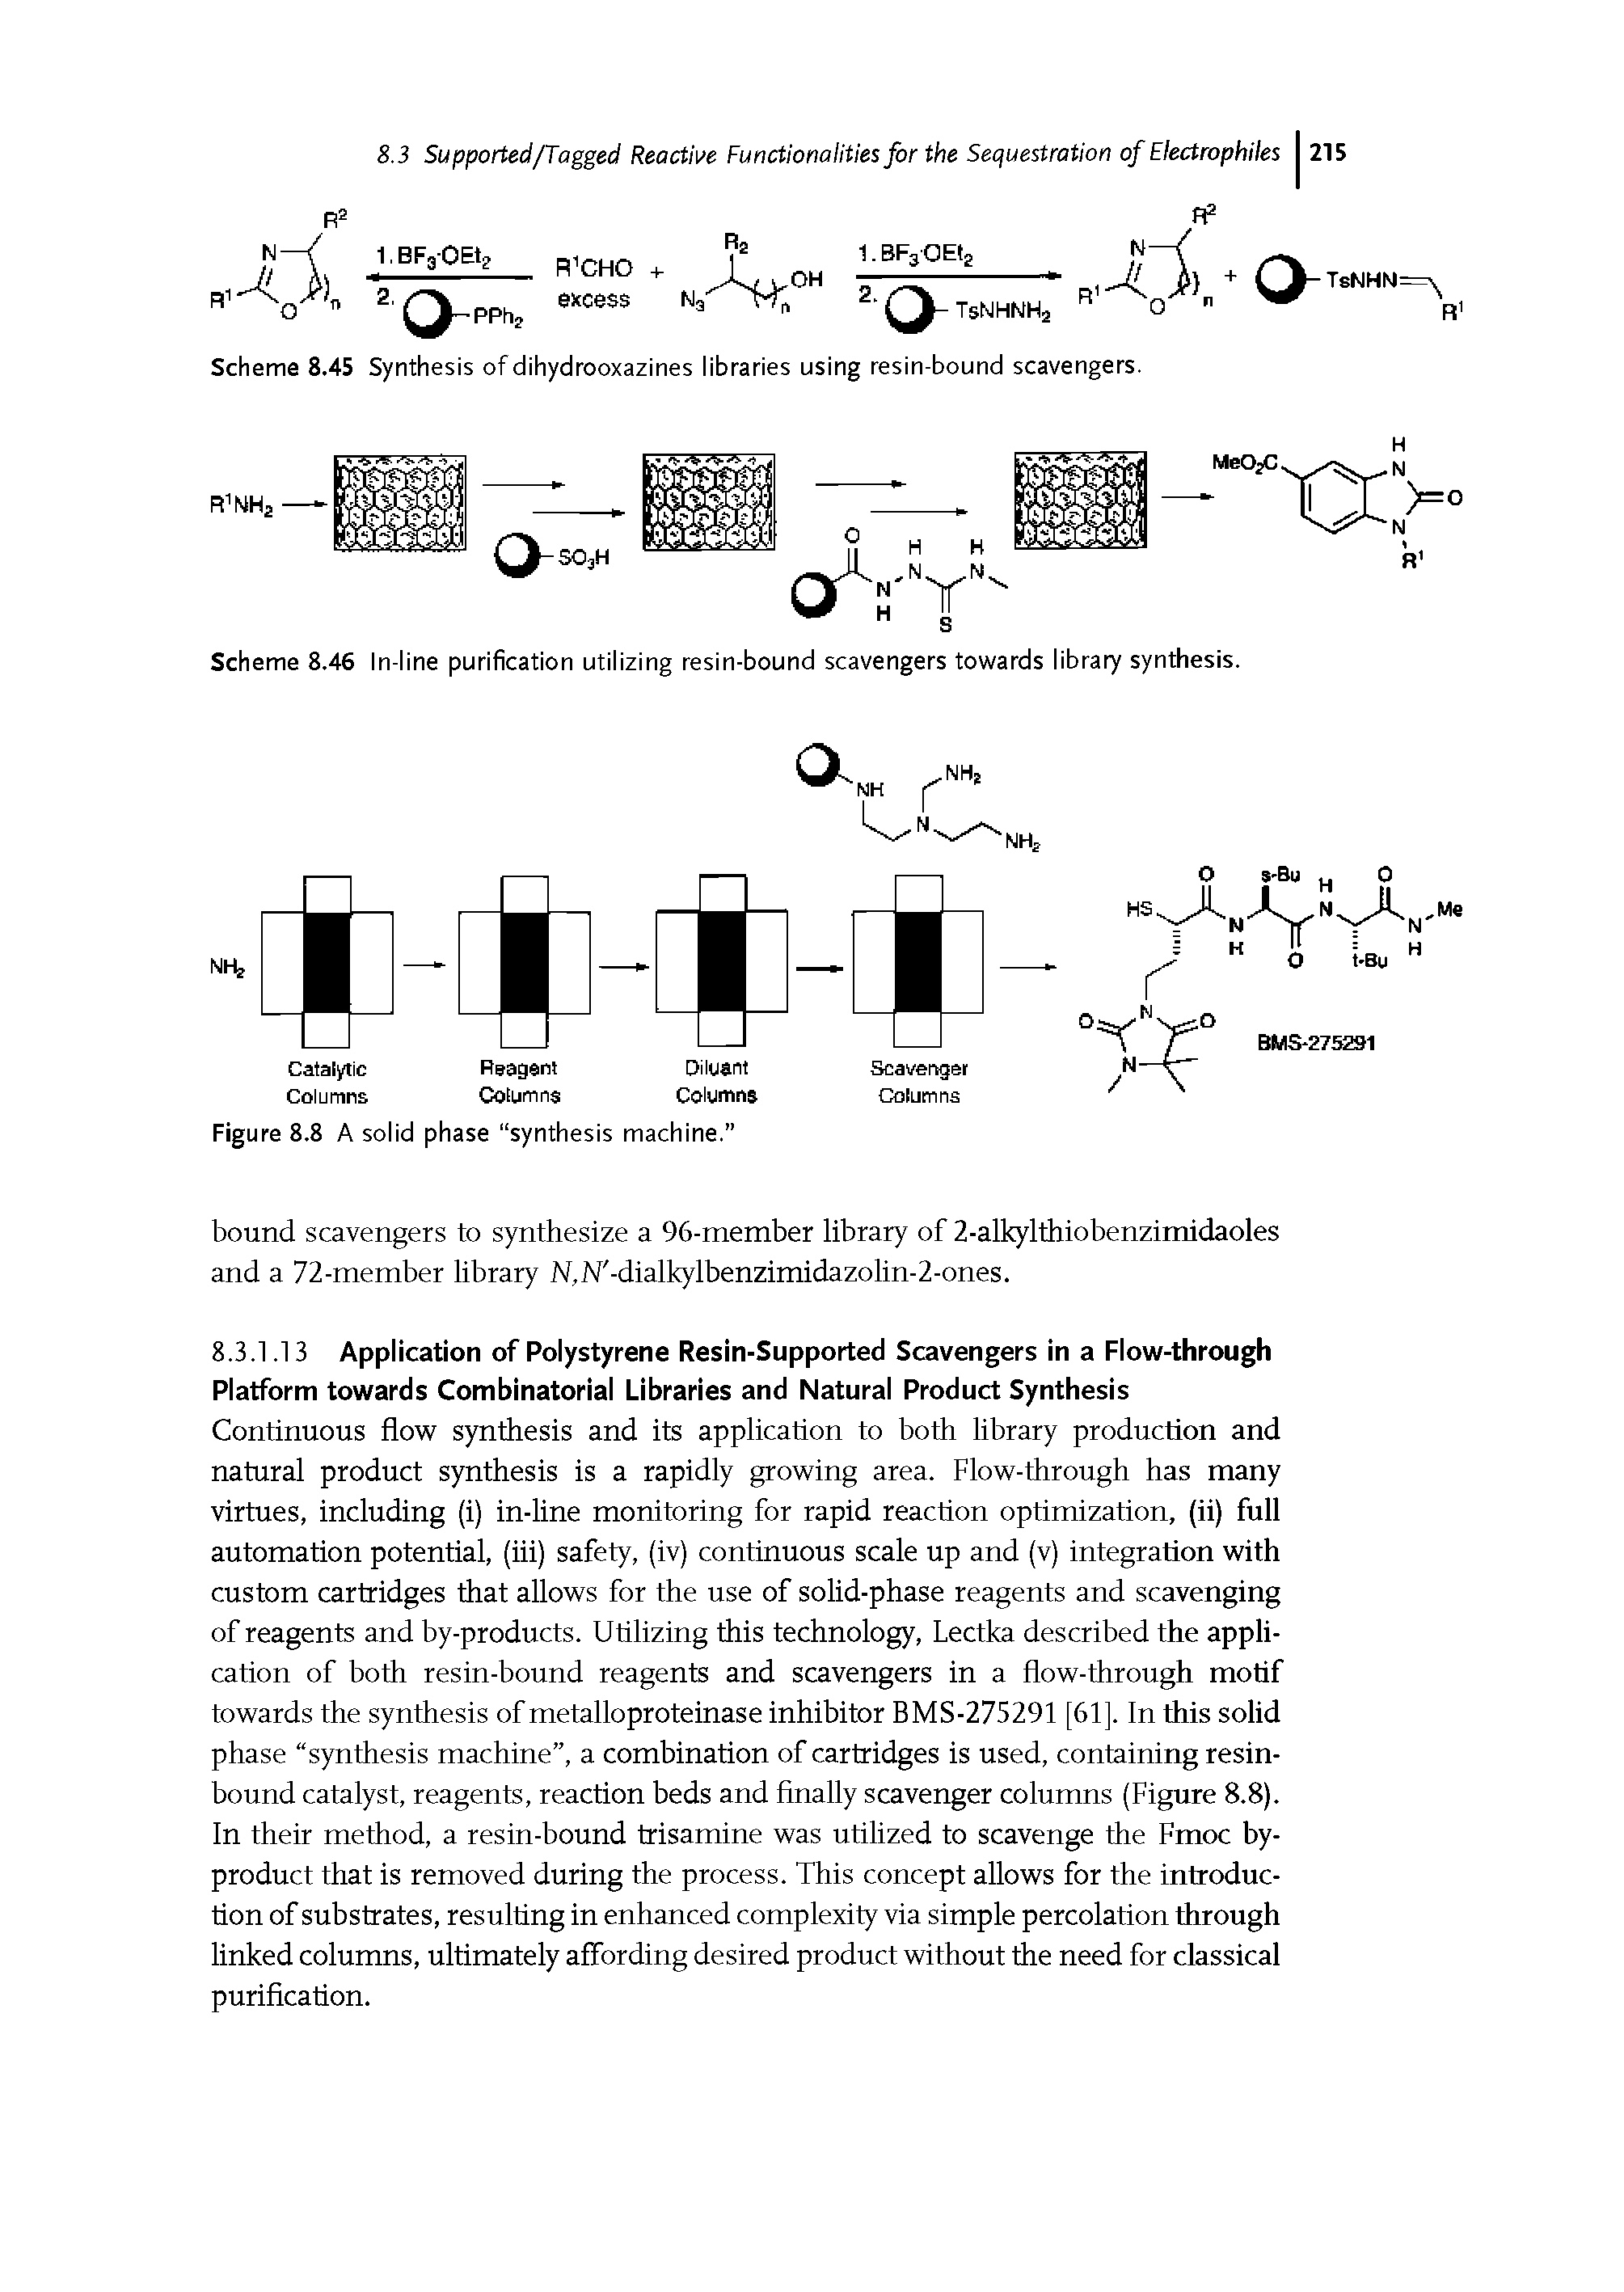 Scheme 8.46 In-line purification utilizing resin-bound scavengers towards library synthesis.